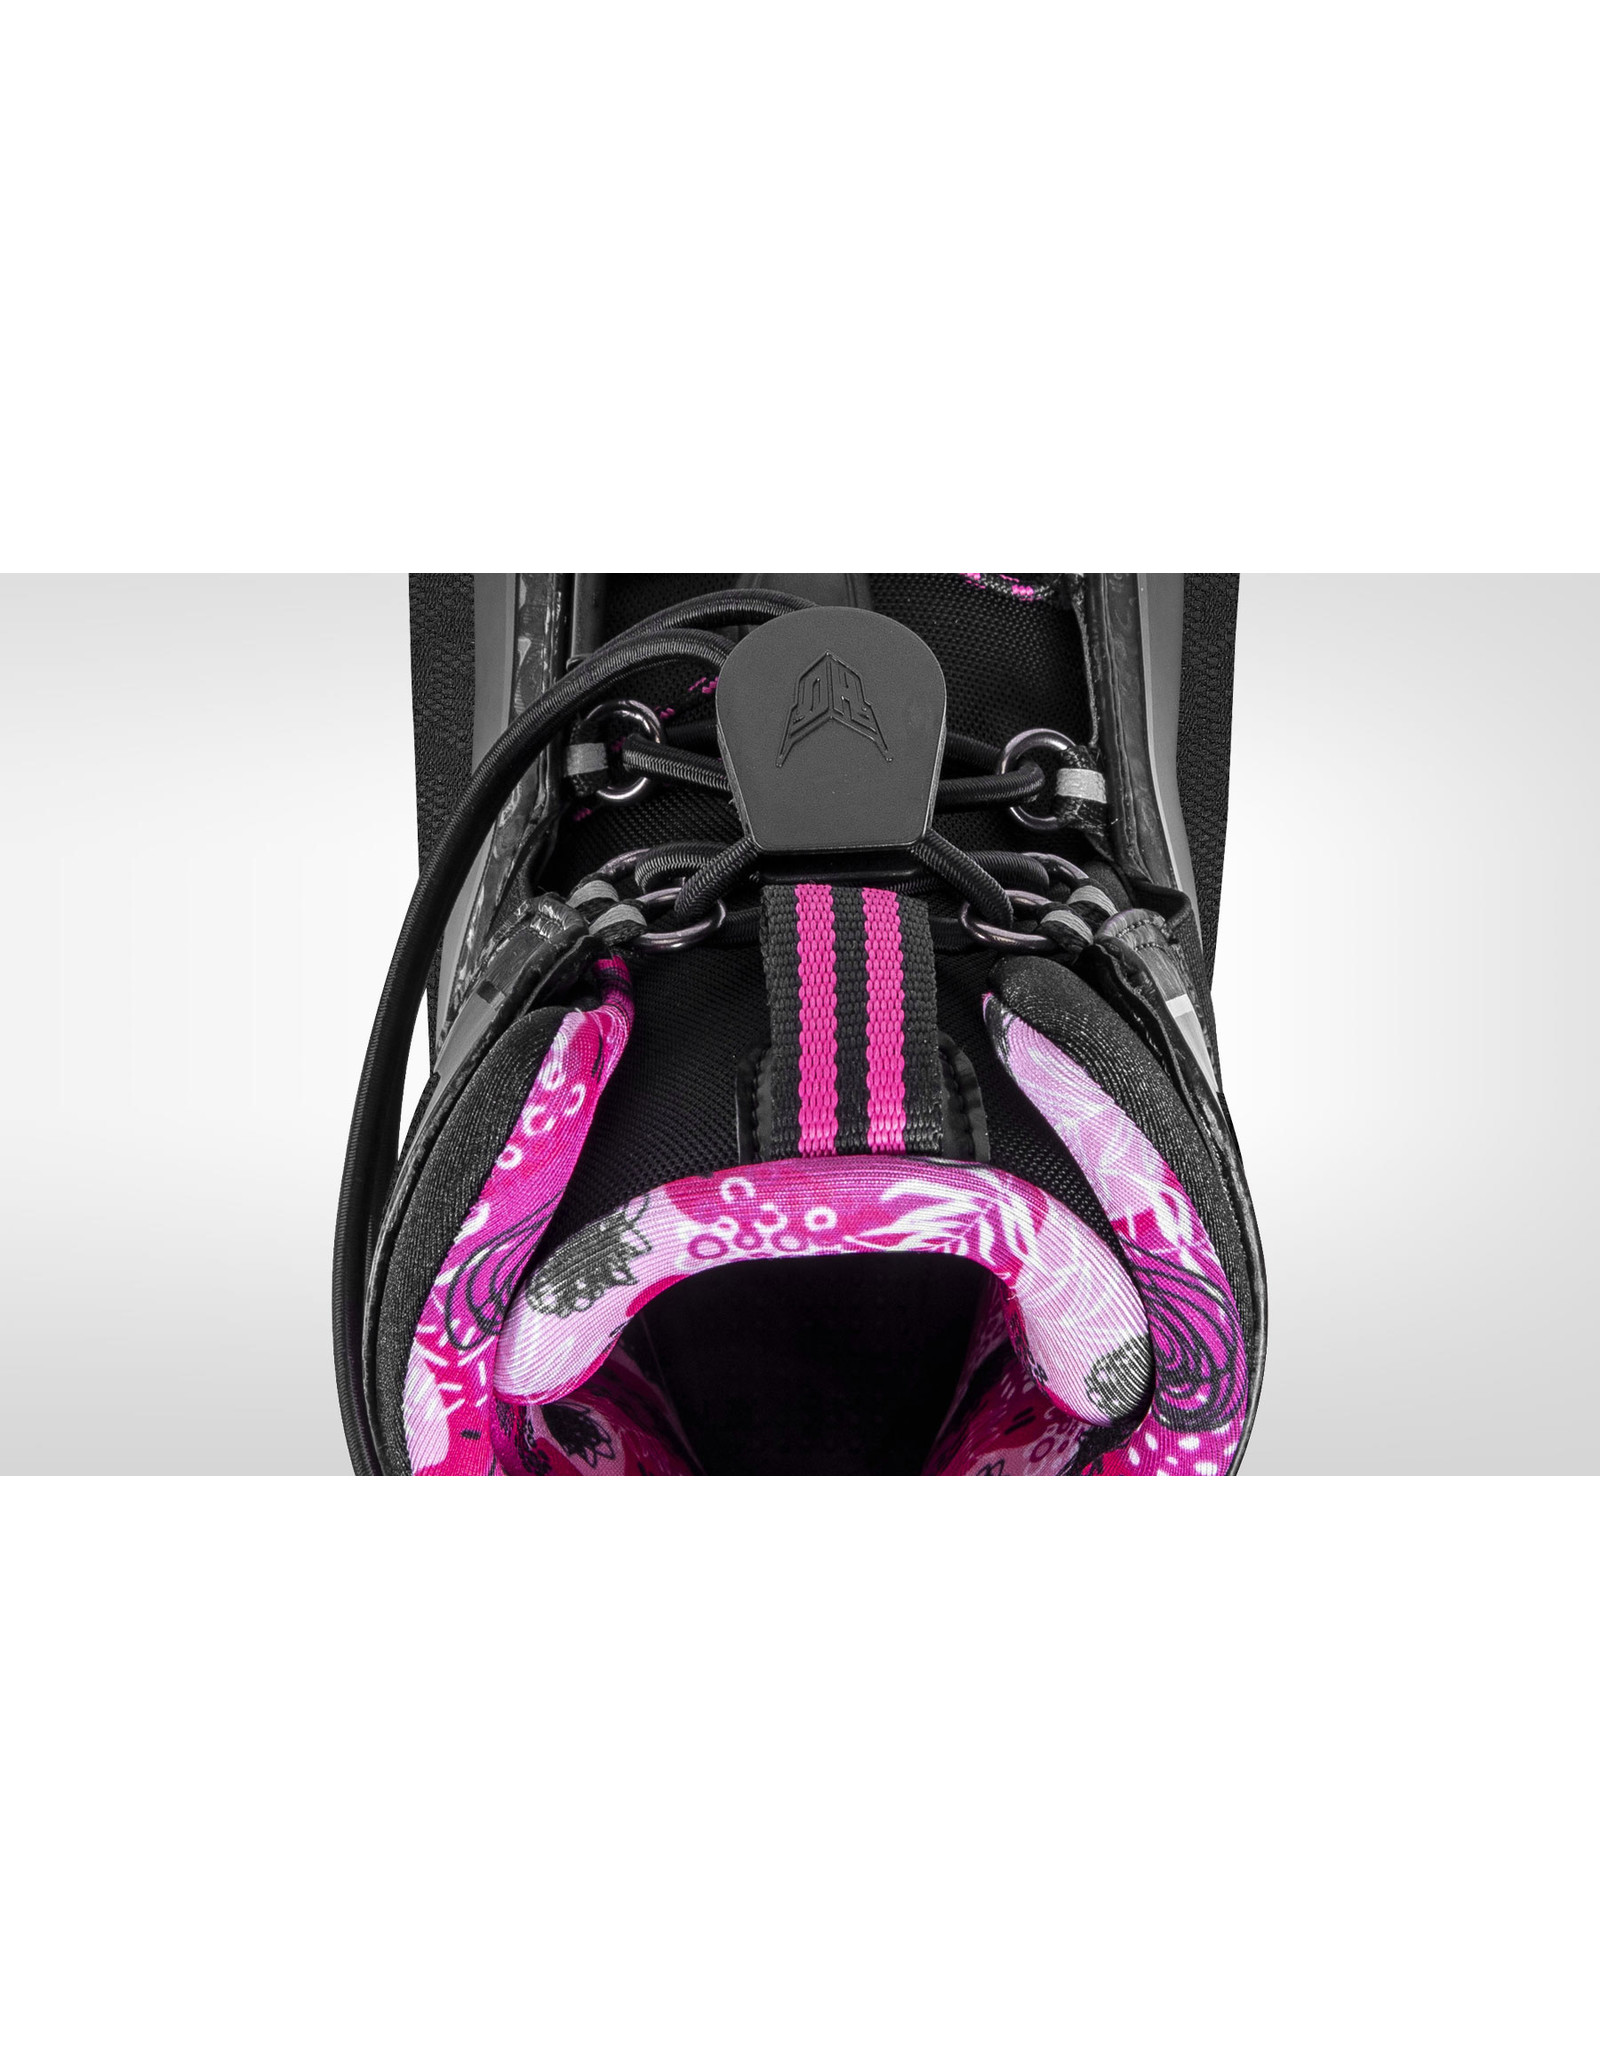 HO/Hyperlite Women's Stance 110 Direct Connect 5.5-9.5